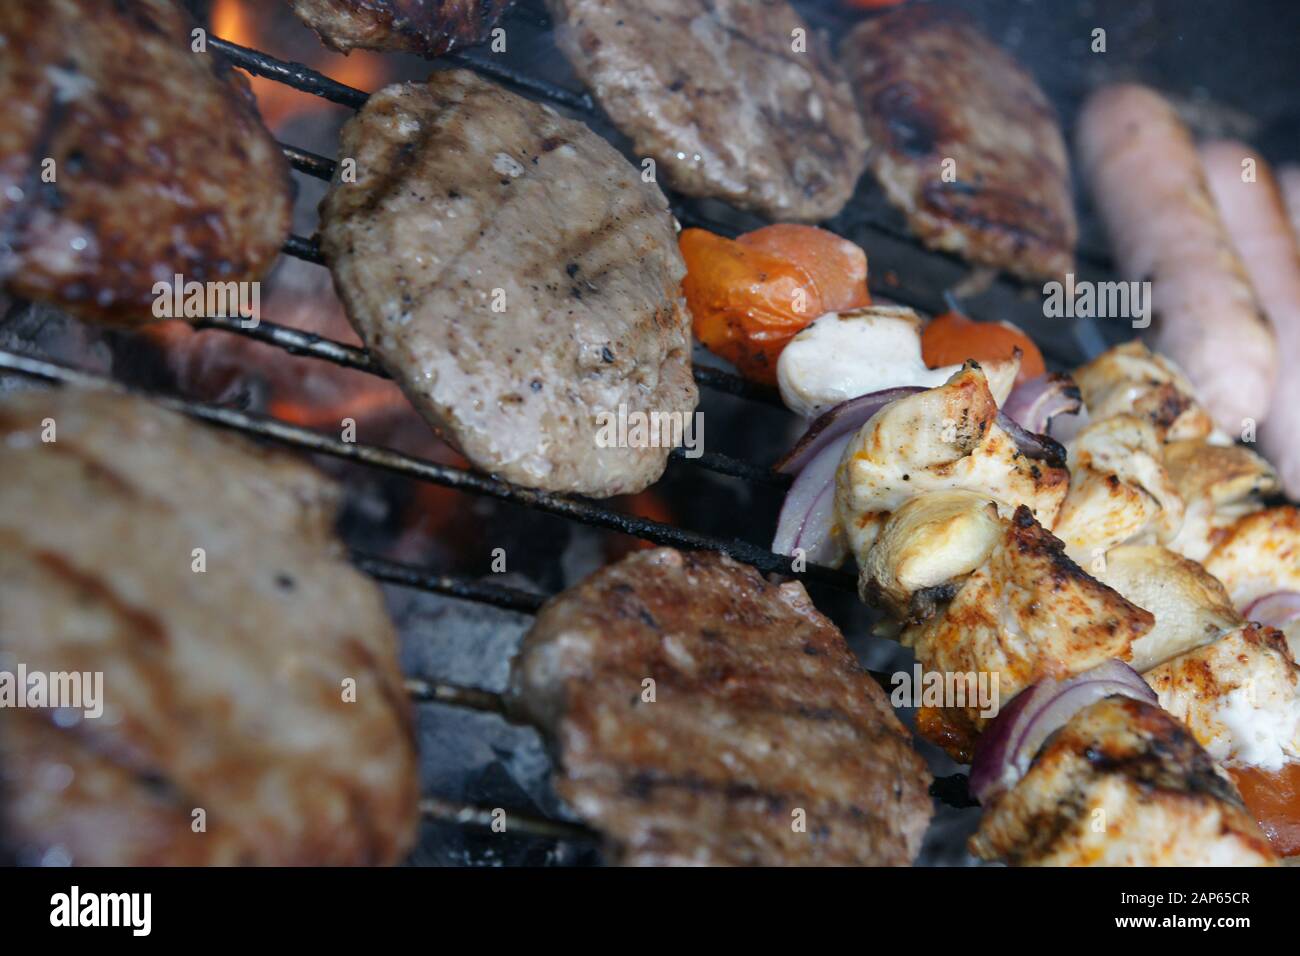 Barbeque Bar B Q Outdoor Cooking Australian Barbecue Stock Photo Alamy